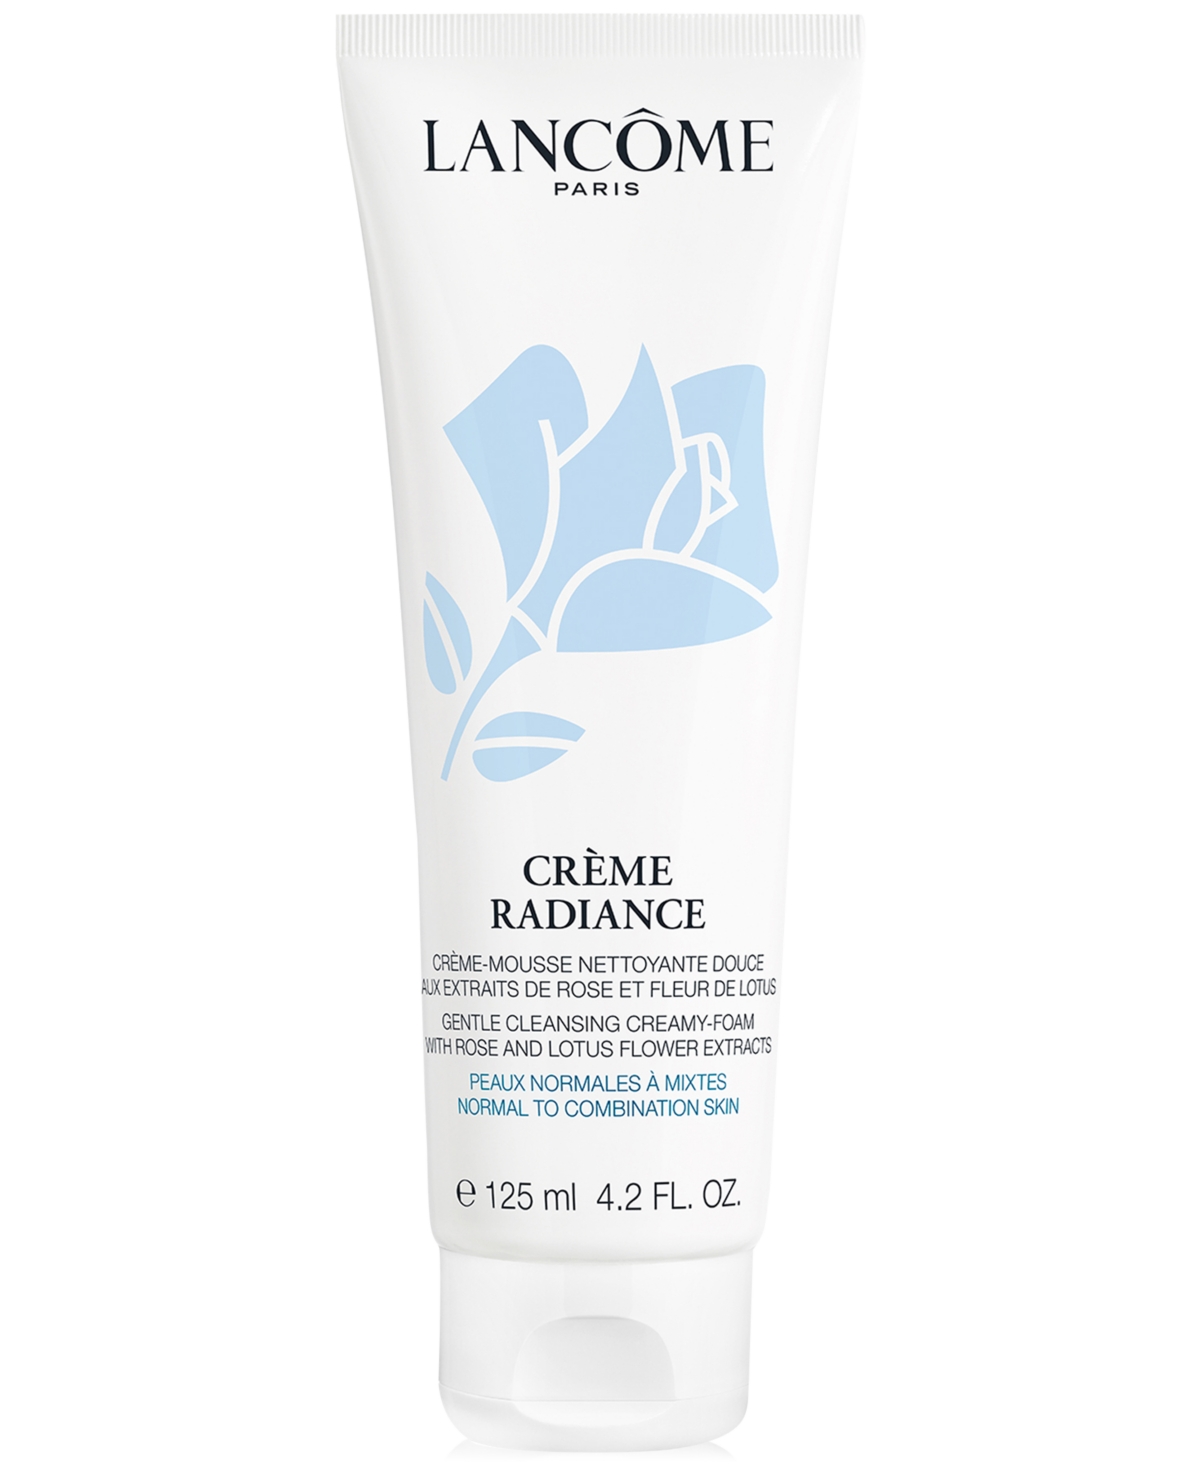 EAN 3605970054915 product image for Lancome Creme Radiance Clarifying Cream-to-Foam Cleanser, 4.2. fl oz. | upcitemdb.com